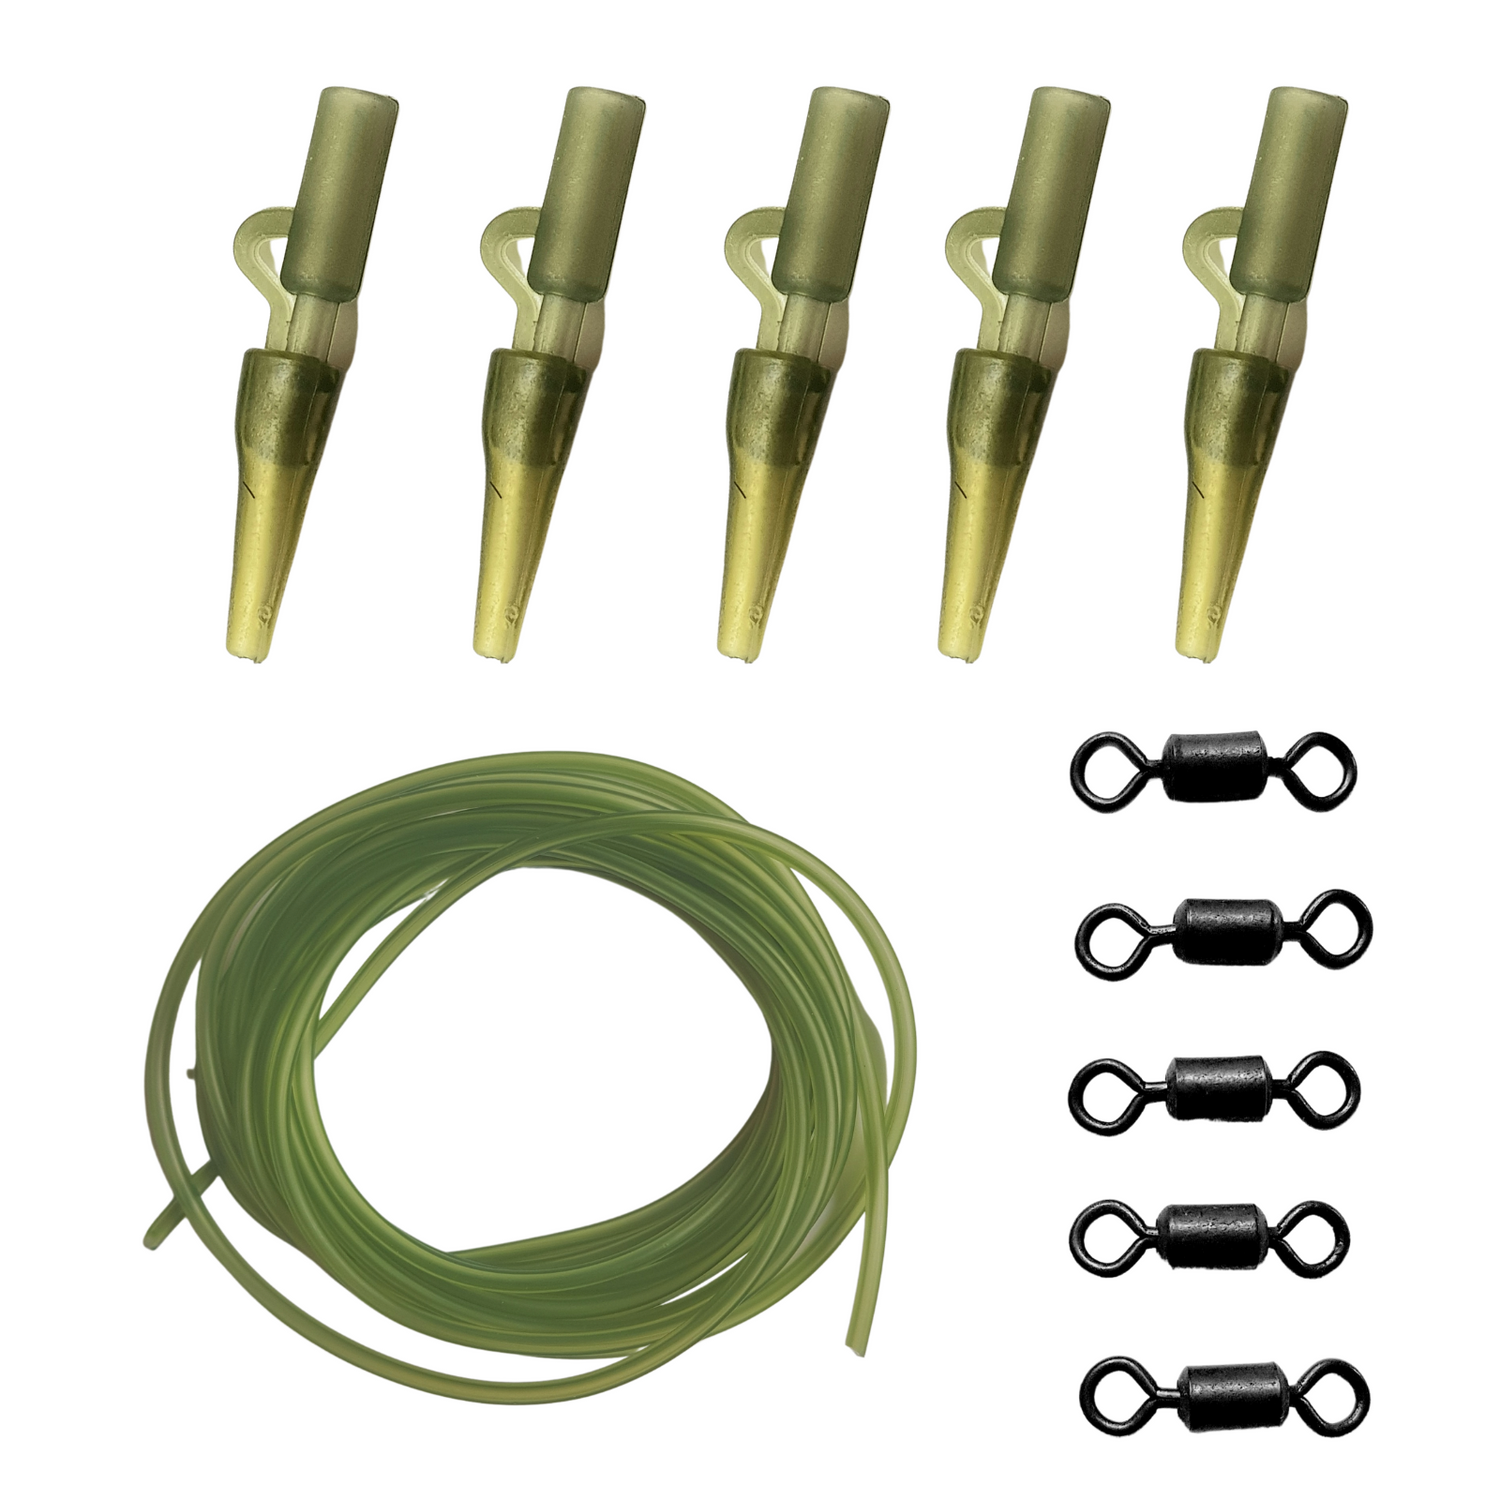 41 Piece Fishing Translucent Green Lead Clip Action Pack Inc Clips, Swivels, Tail Rubbers 6mm Beads & Tubing